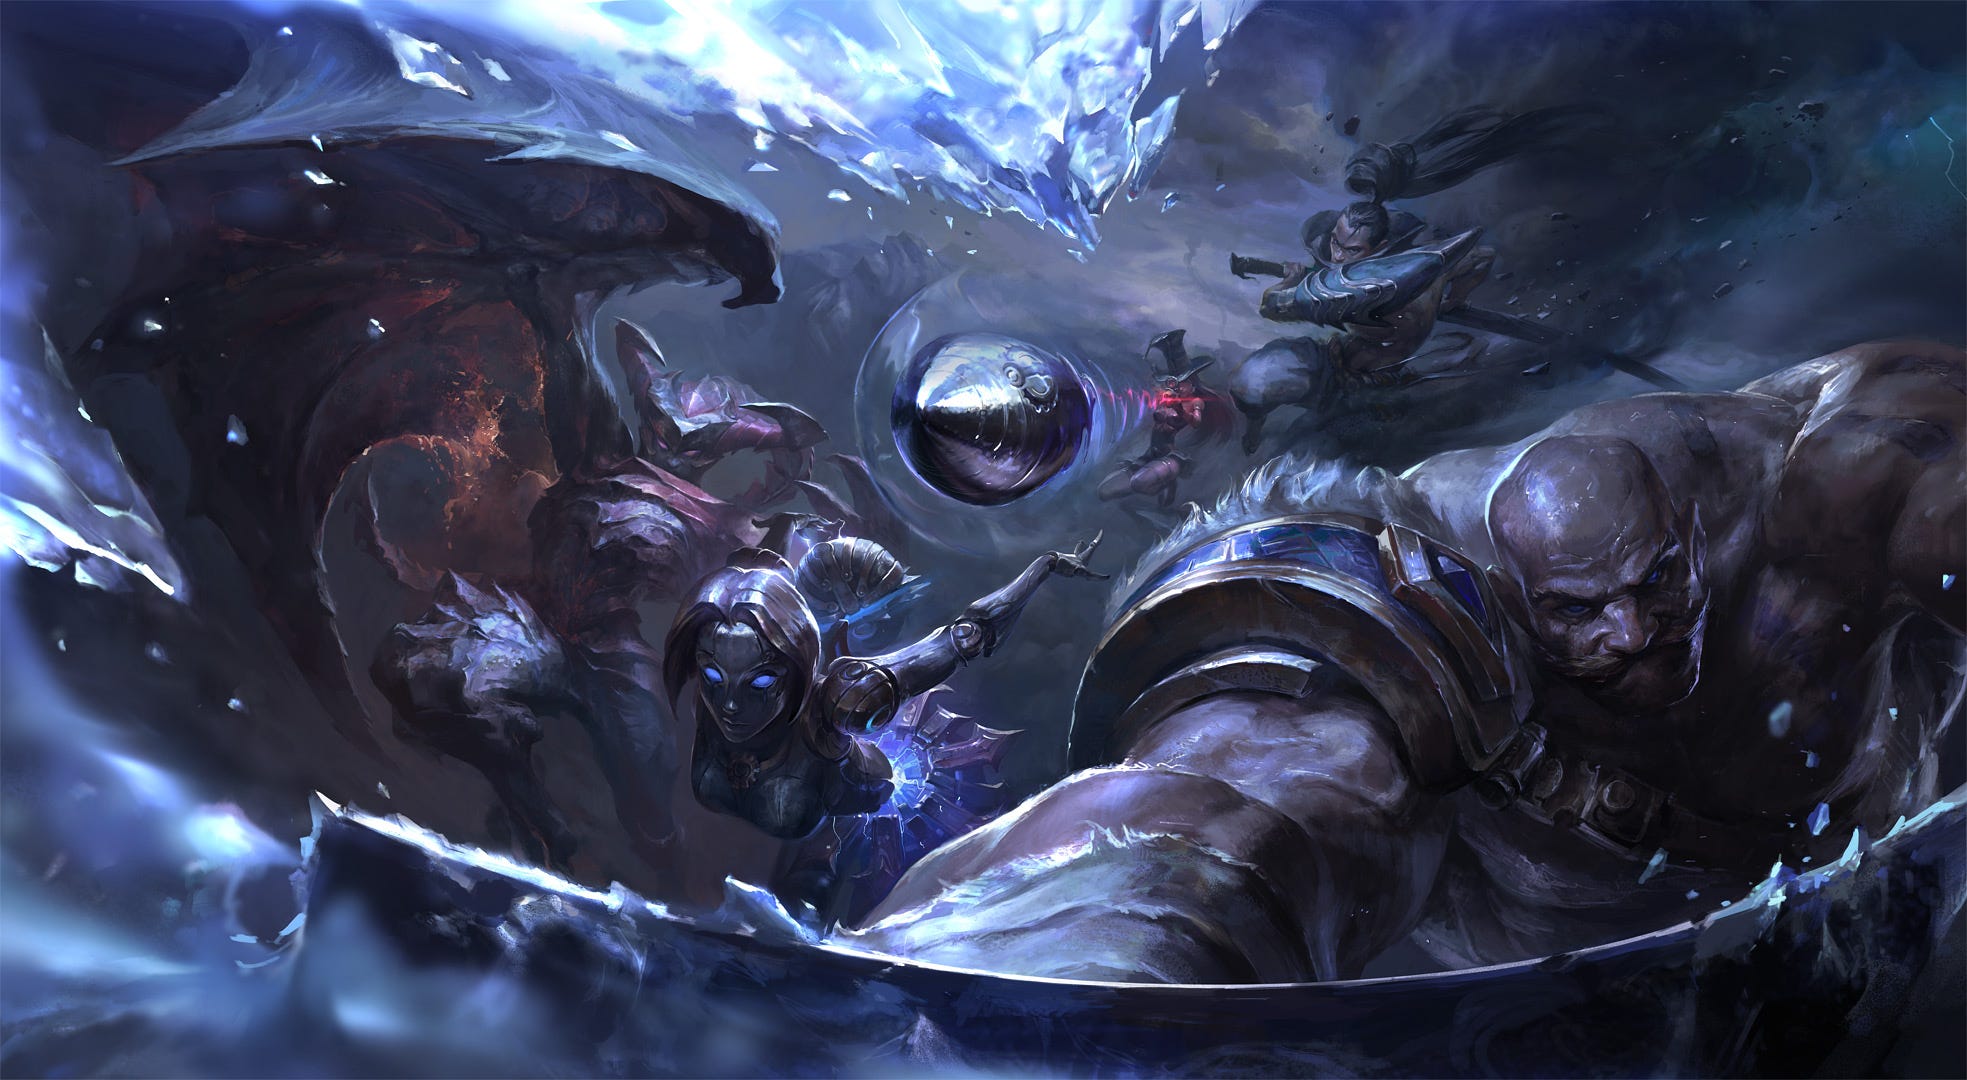 5 Reasons Why You Should Be Playing League of Legends - The Game of Nerds